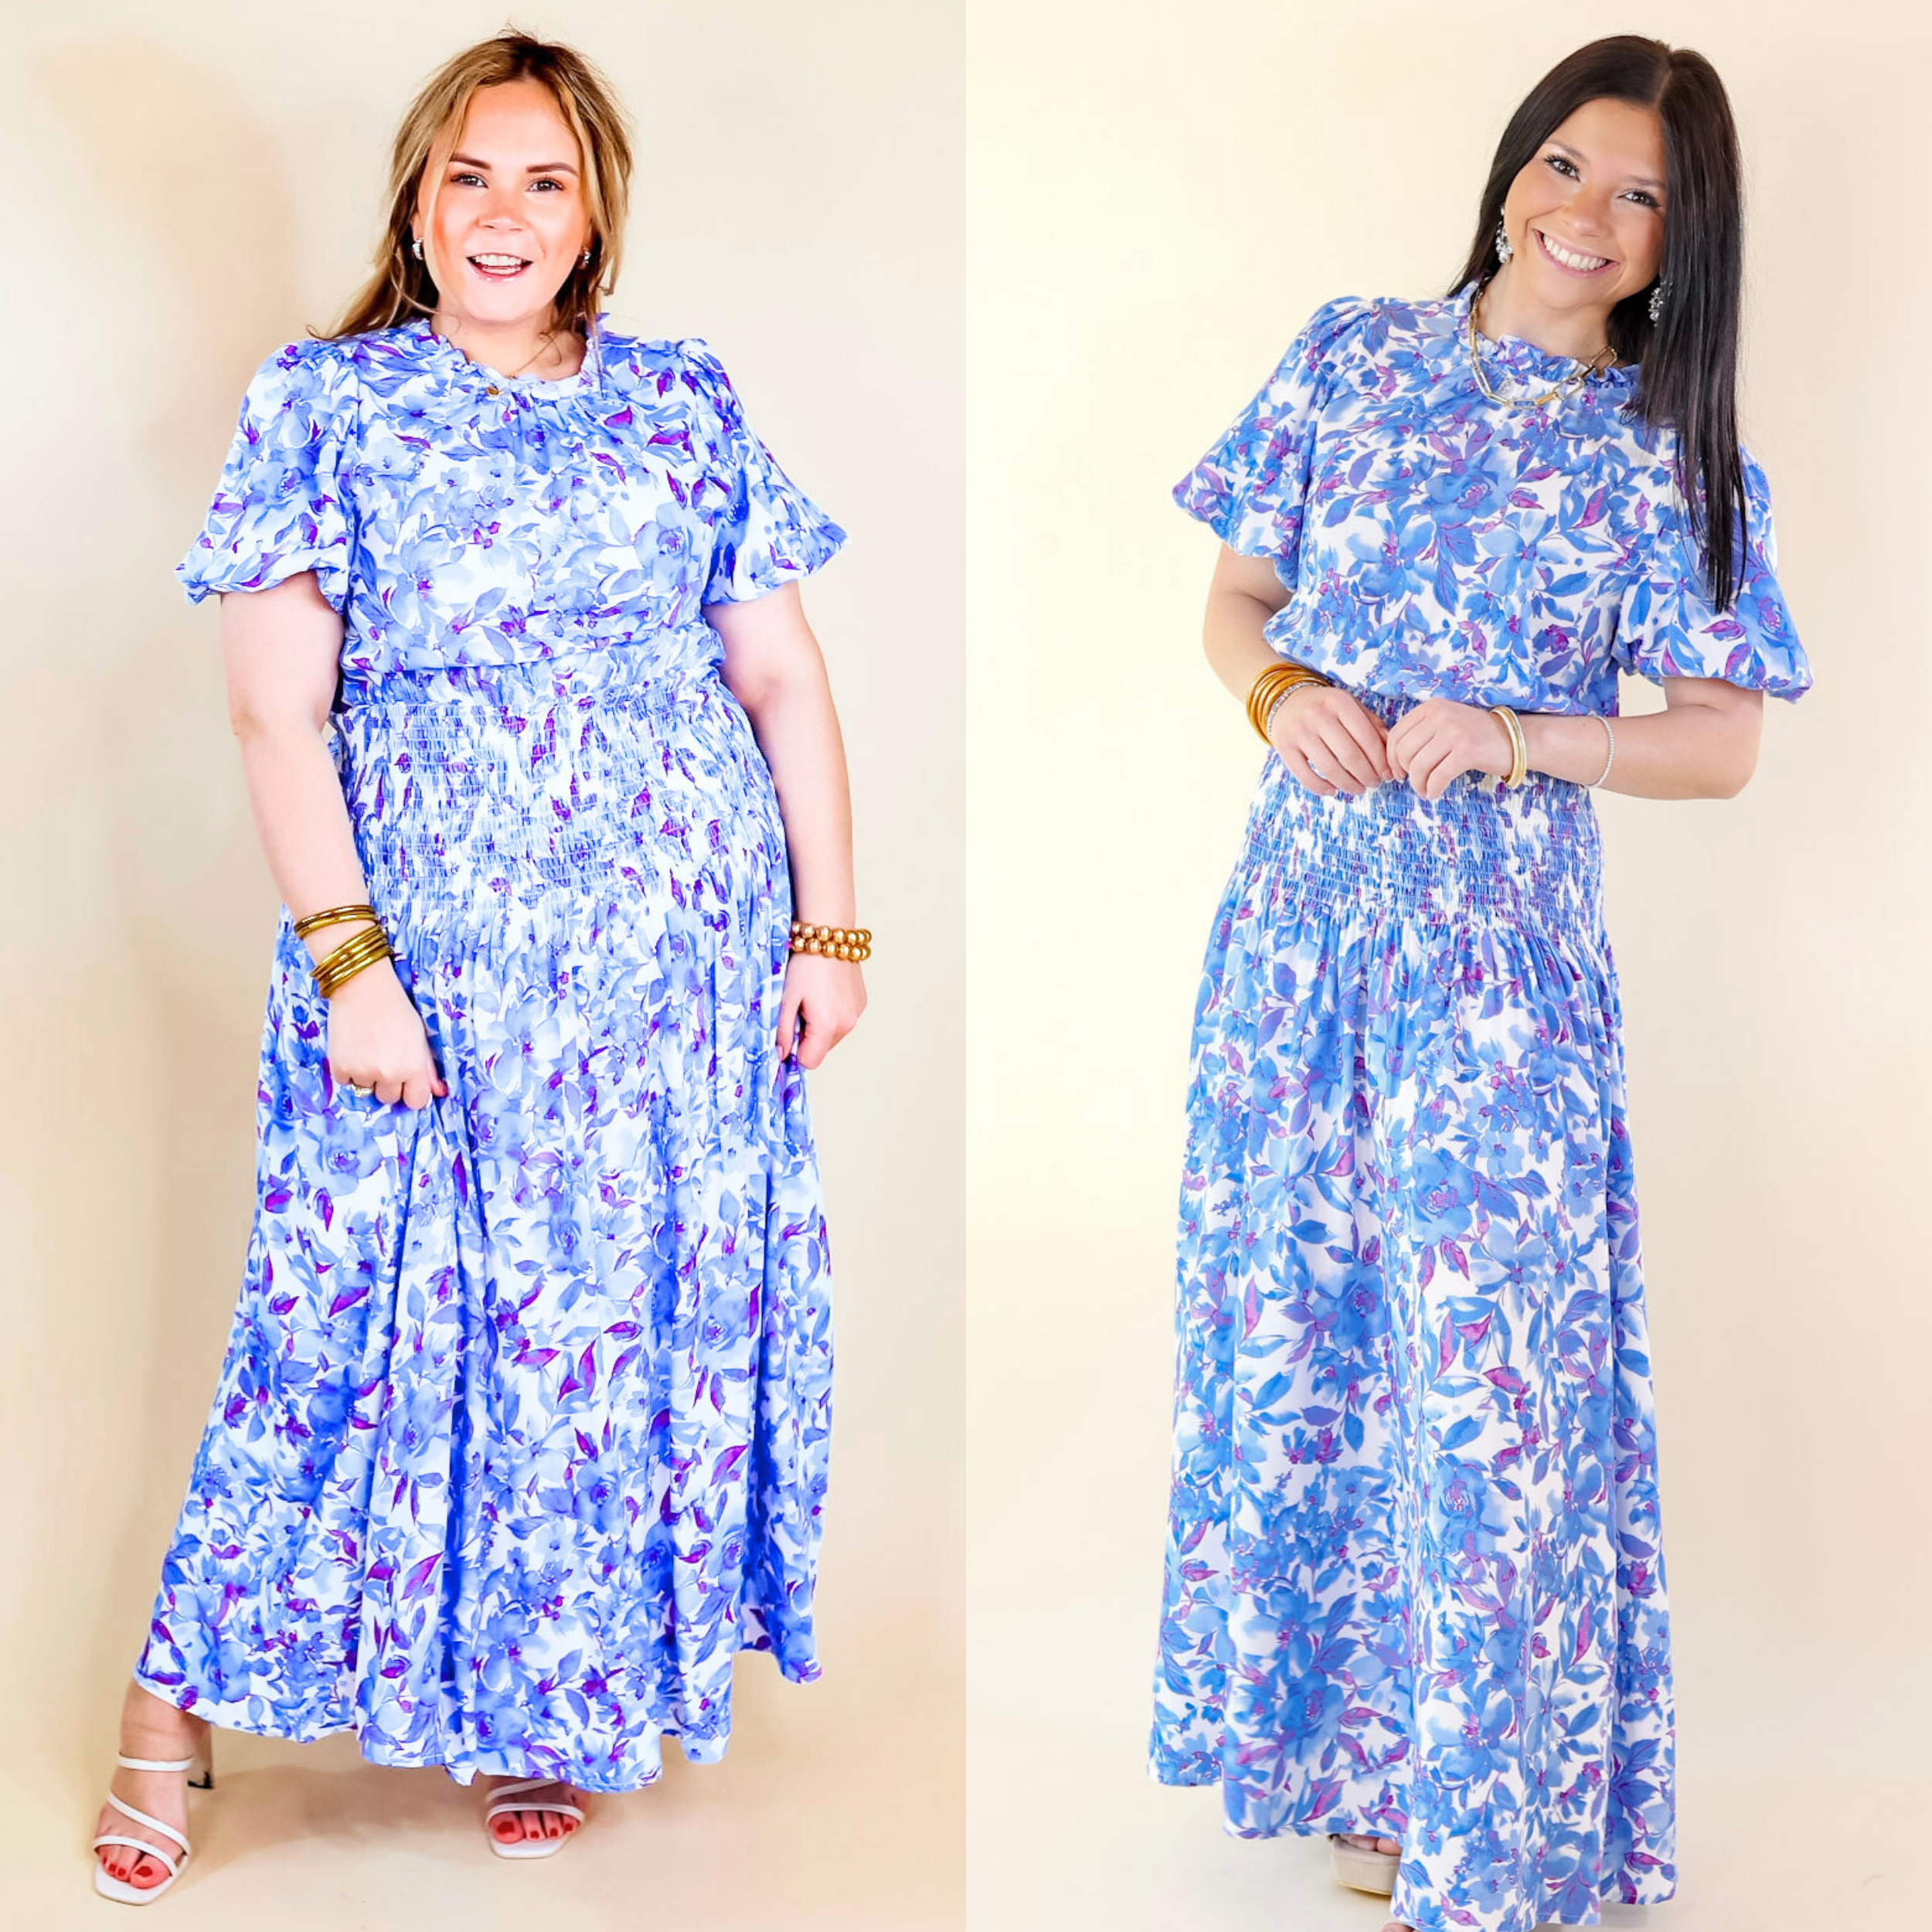 Moonlit Bay Floral High Neck Maxi dress with Smocked Waistline in Blue - Giddy Up Glamour Boutique